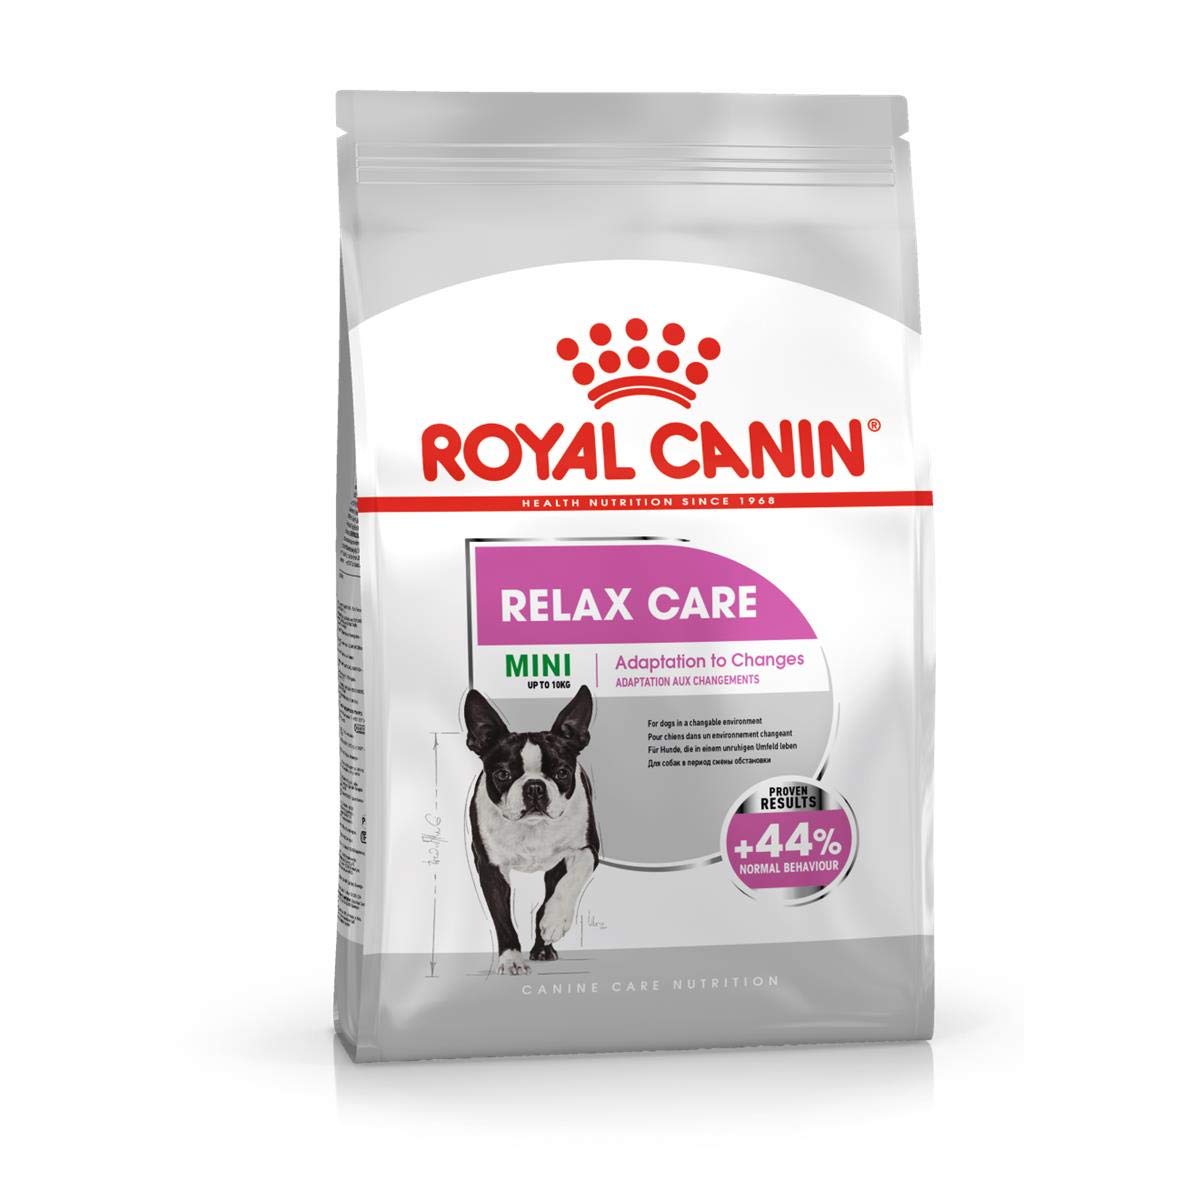 Royal Canin Relax Care Mini Dog Dry Food